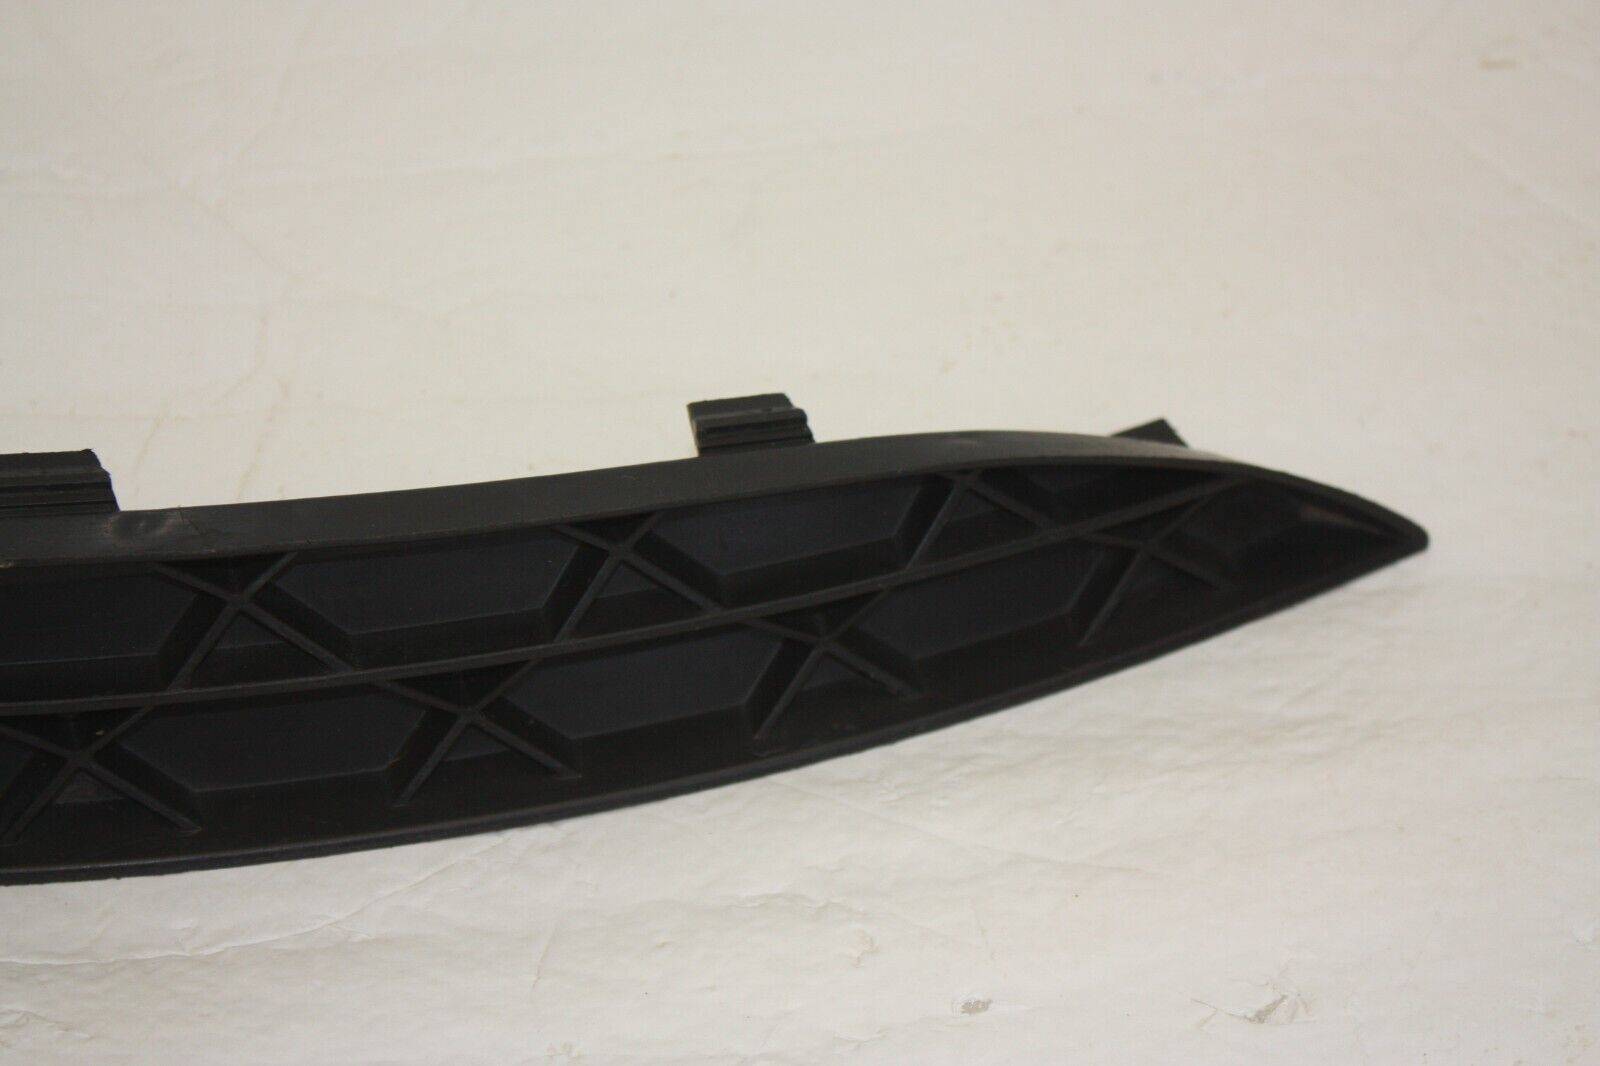 Citroen-C4-Picasso-Front-Bumper-Right-Lower-Grill-2007-TO-2011-9680403277-176254461016-2